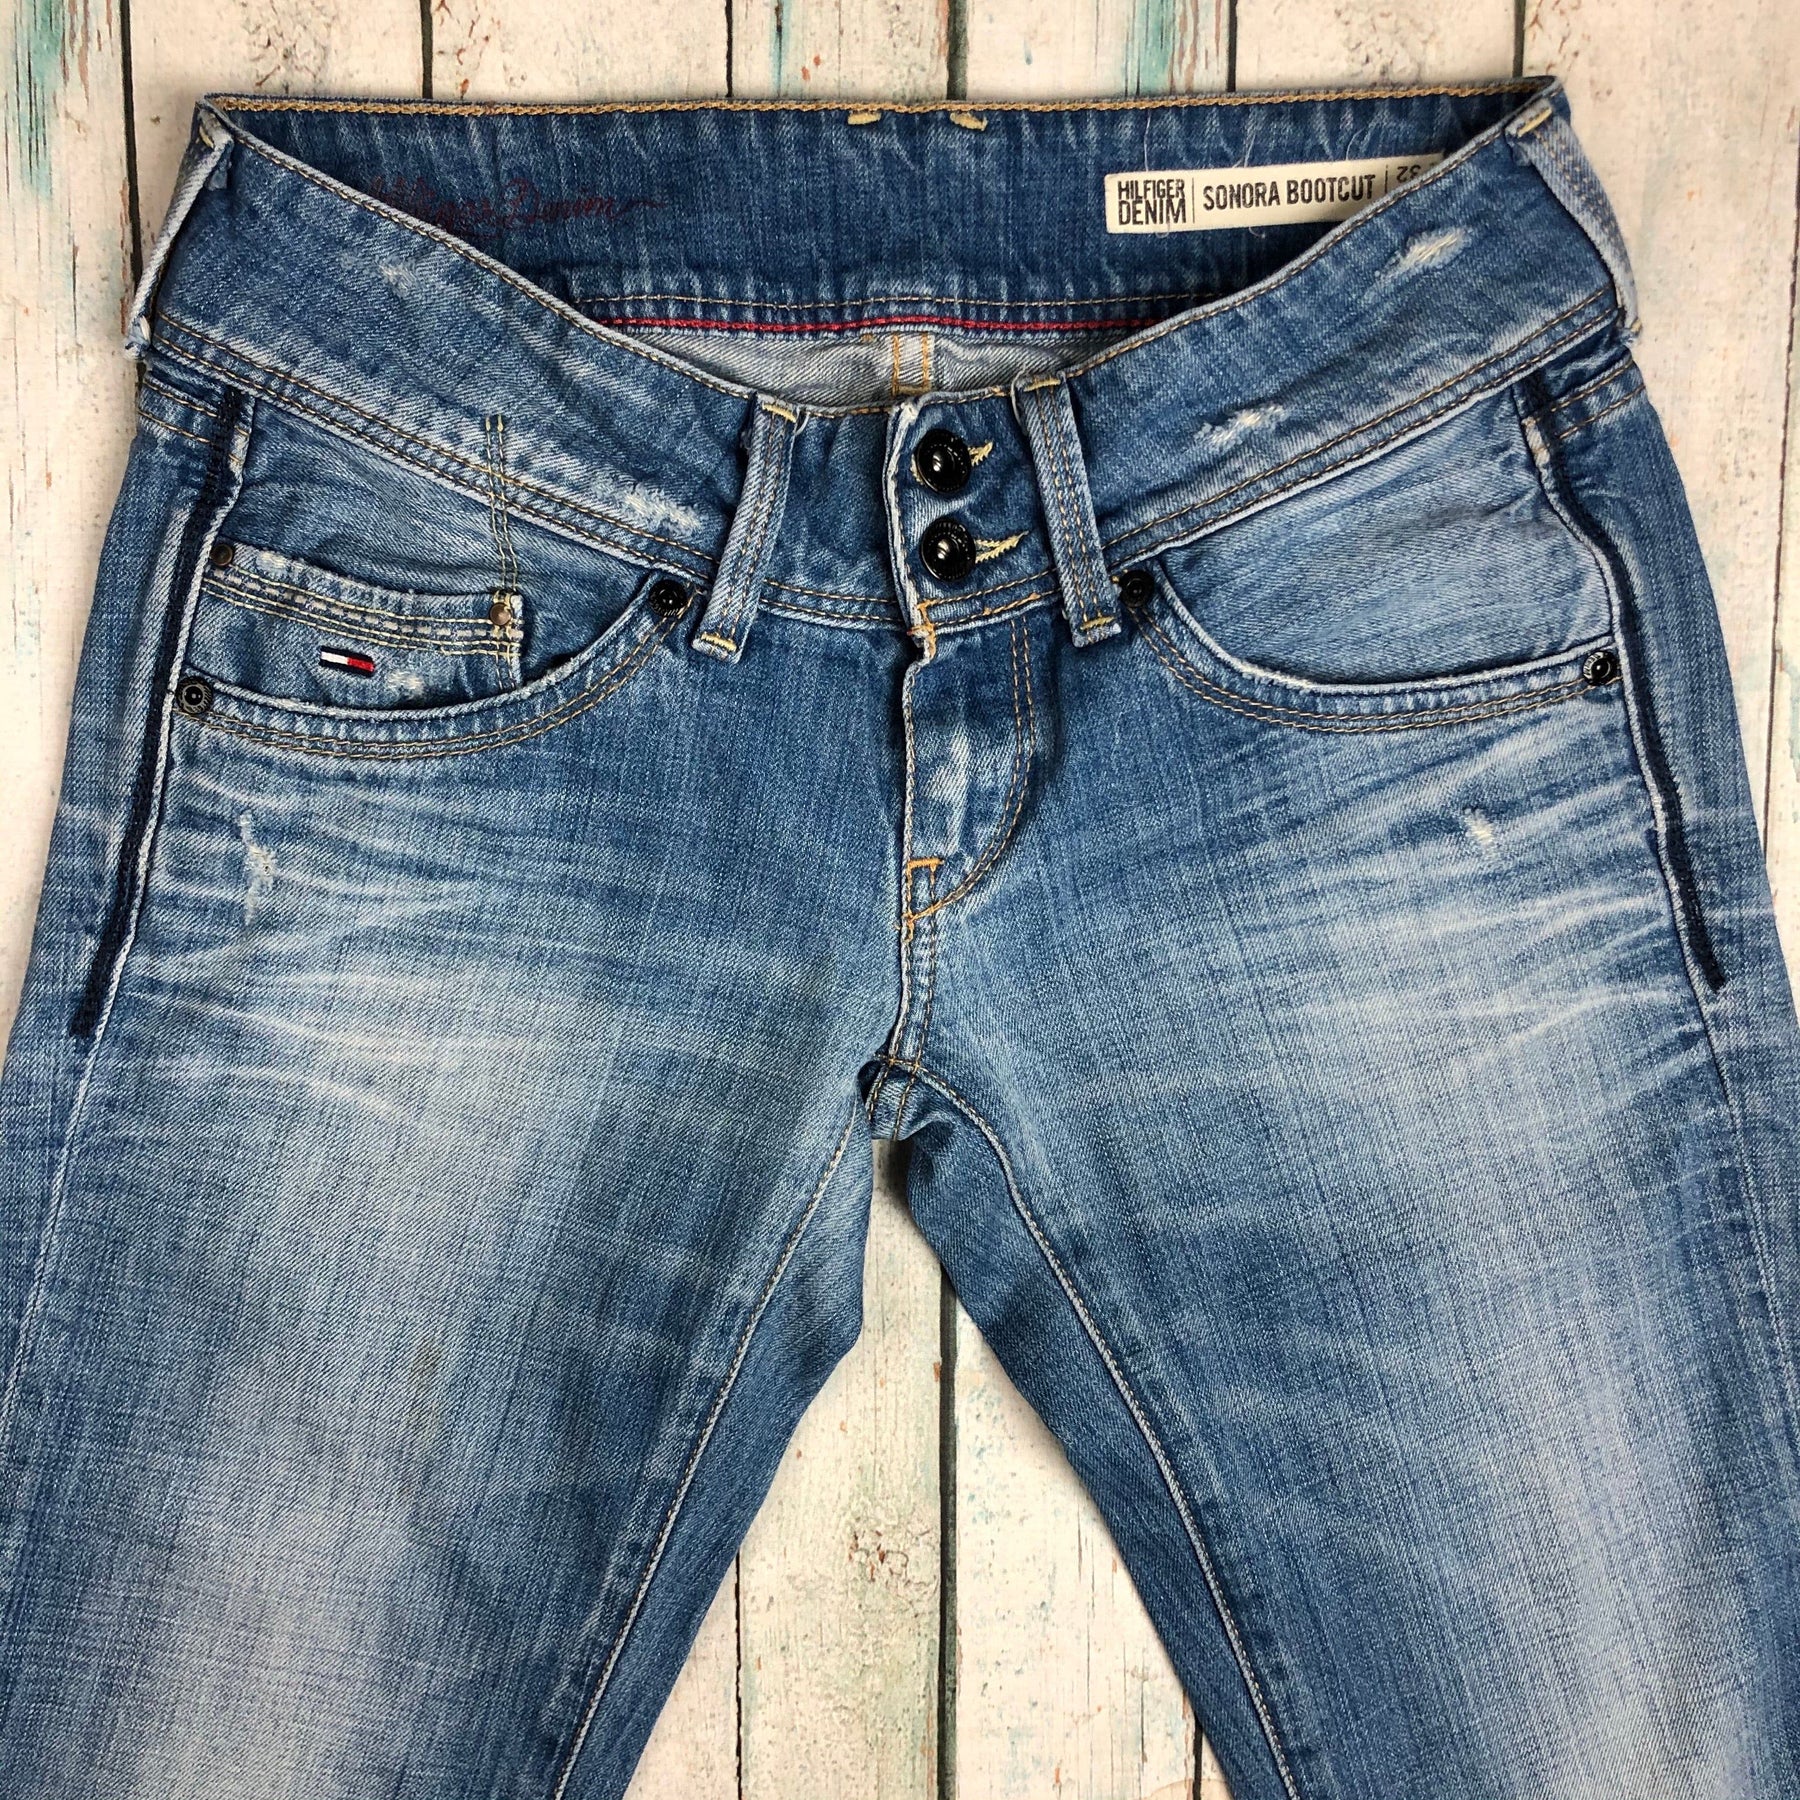 Tommy Hilfiger Distressed 'Sonora 